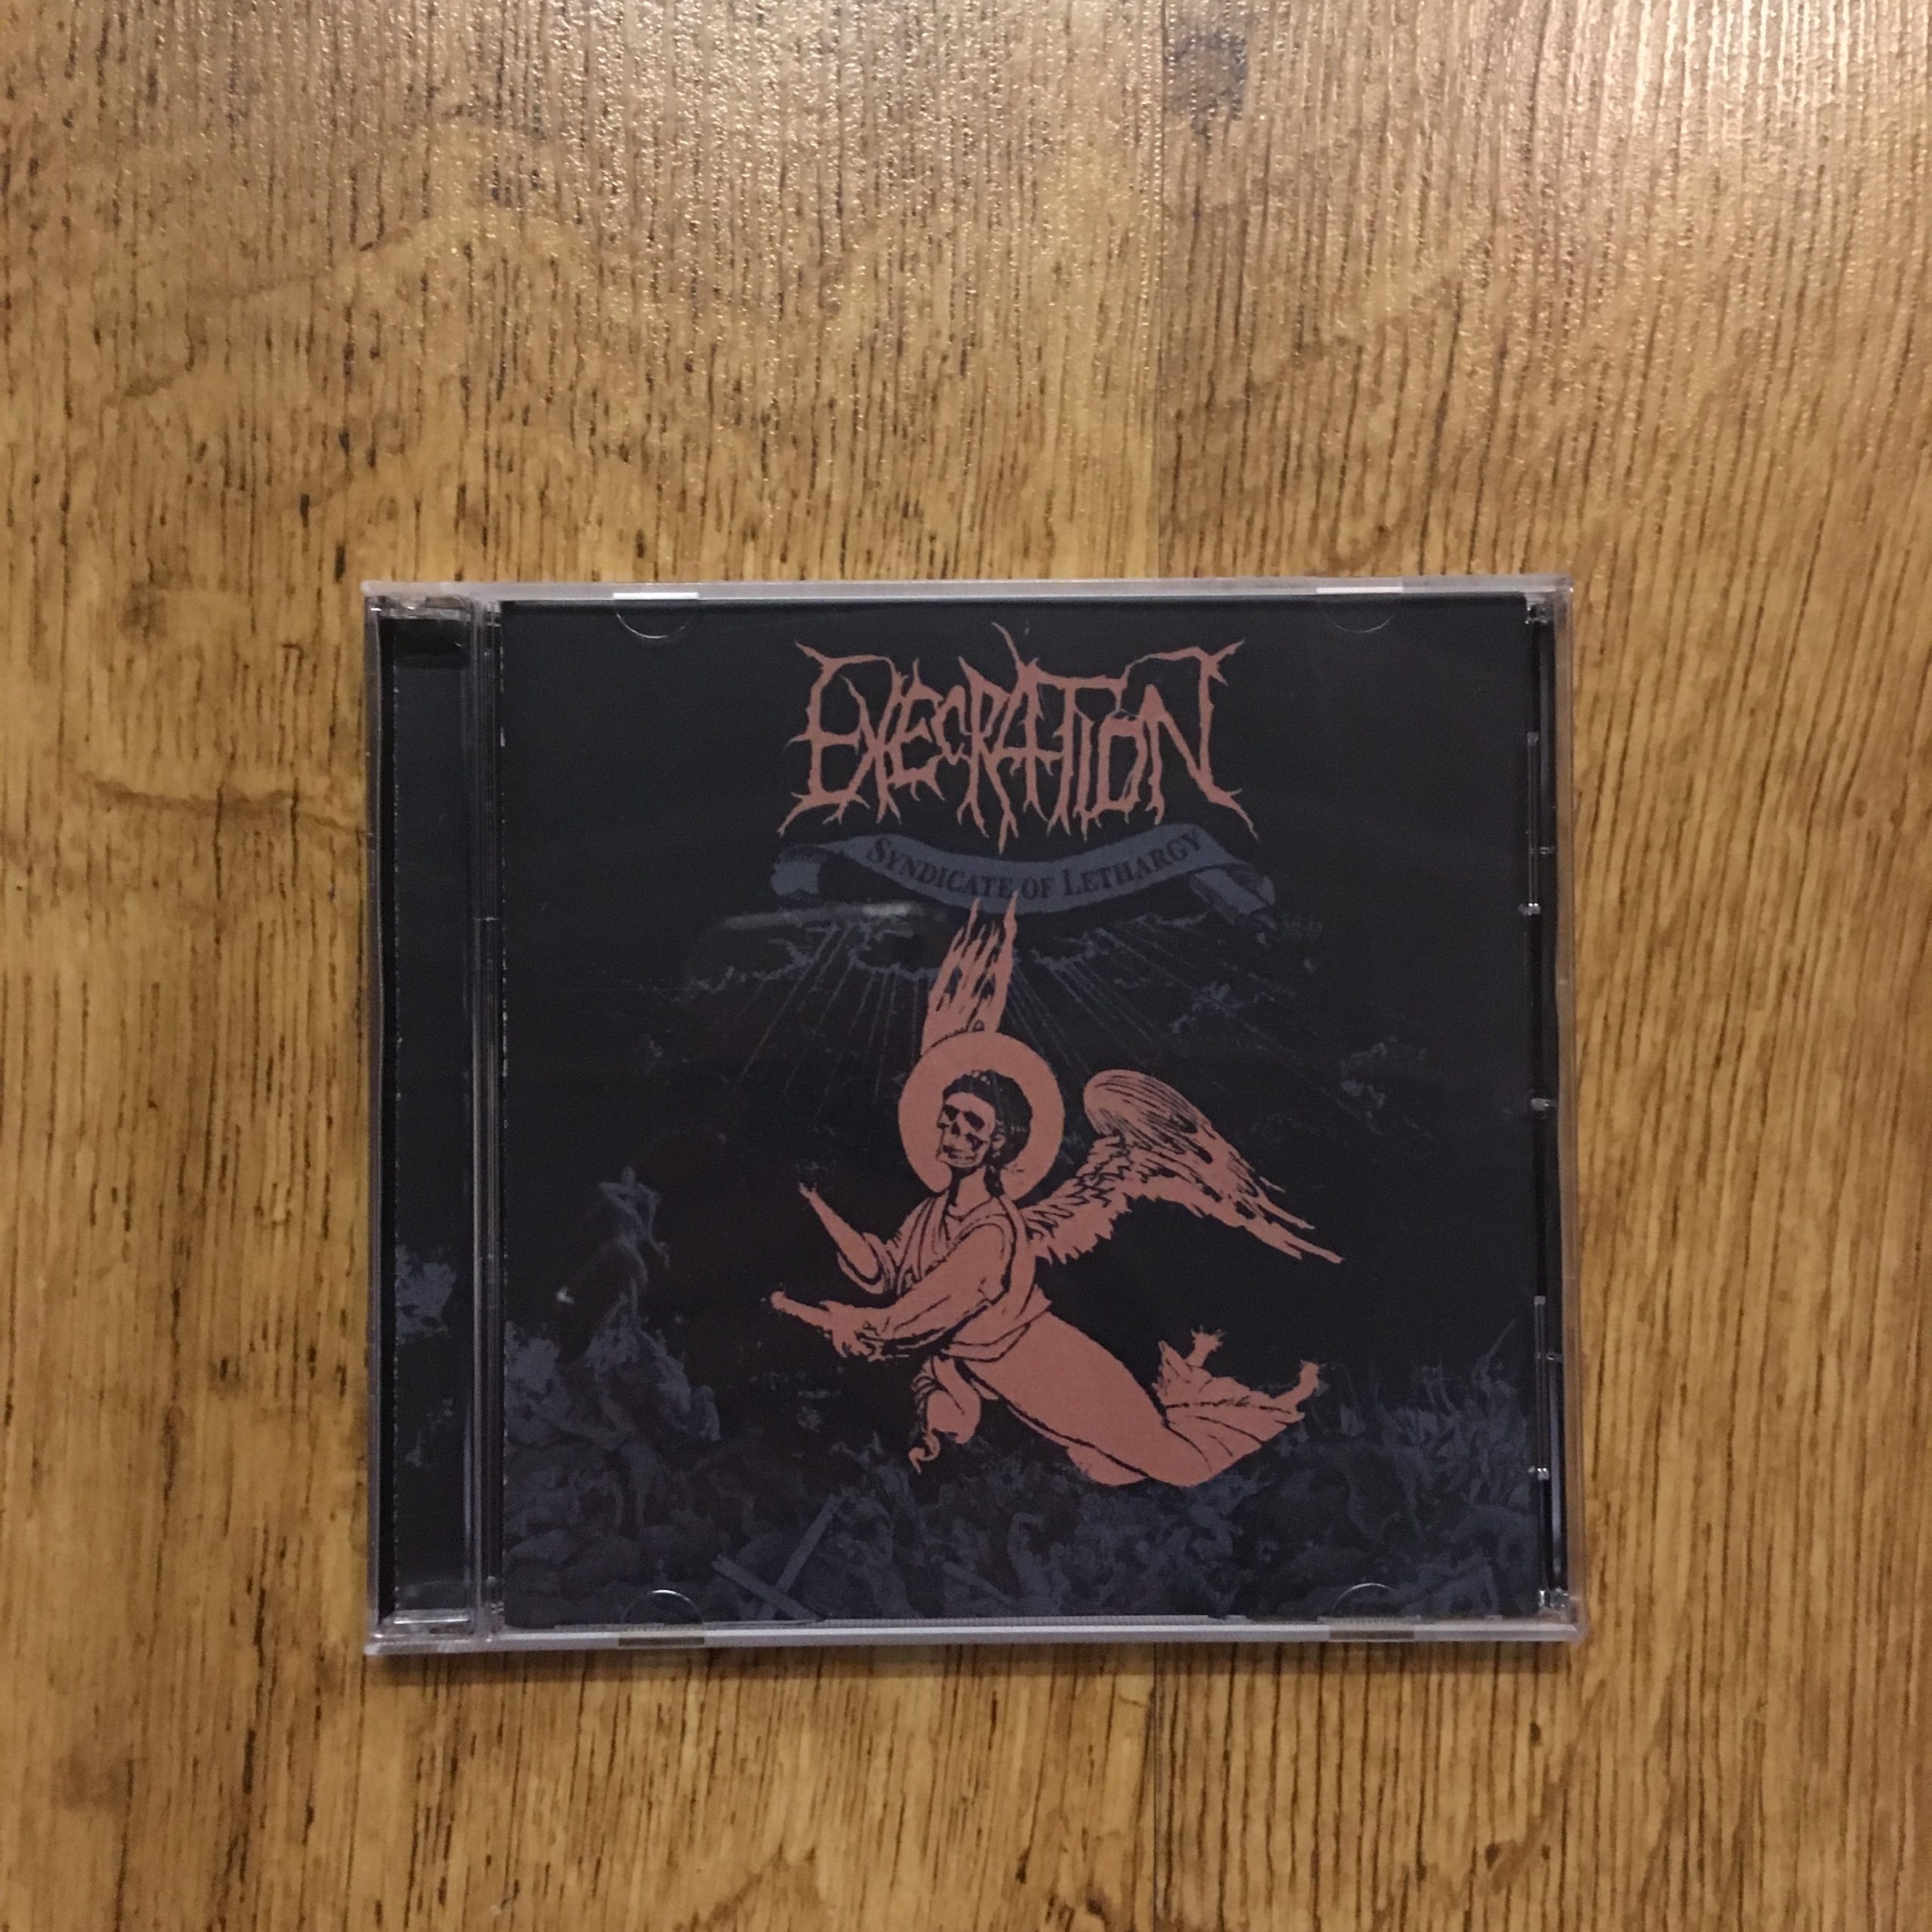 Photo of the Execration - "Syndicate of Lethargy" CD